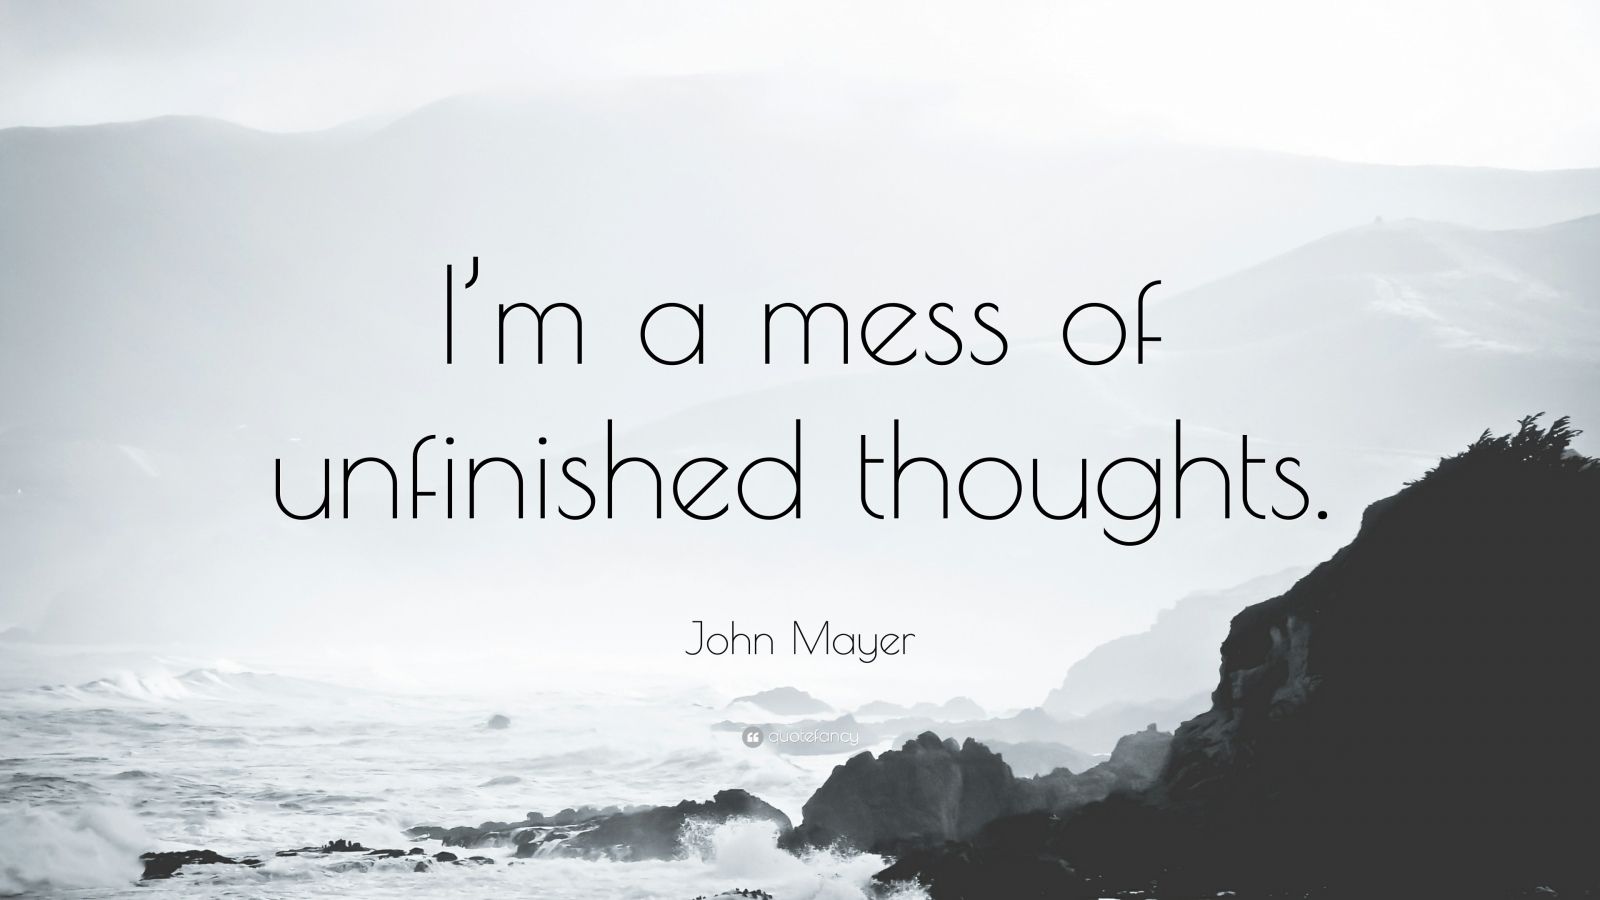 John Mayer Quote: “I'm a mess of unfinished thoughts.” (12 wallpaper)